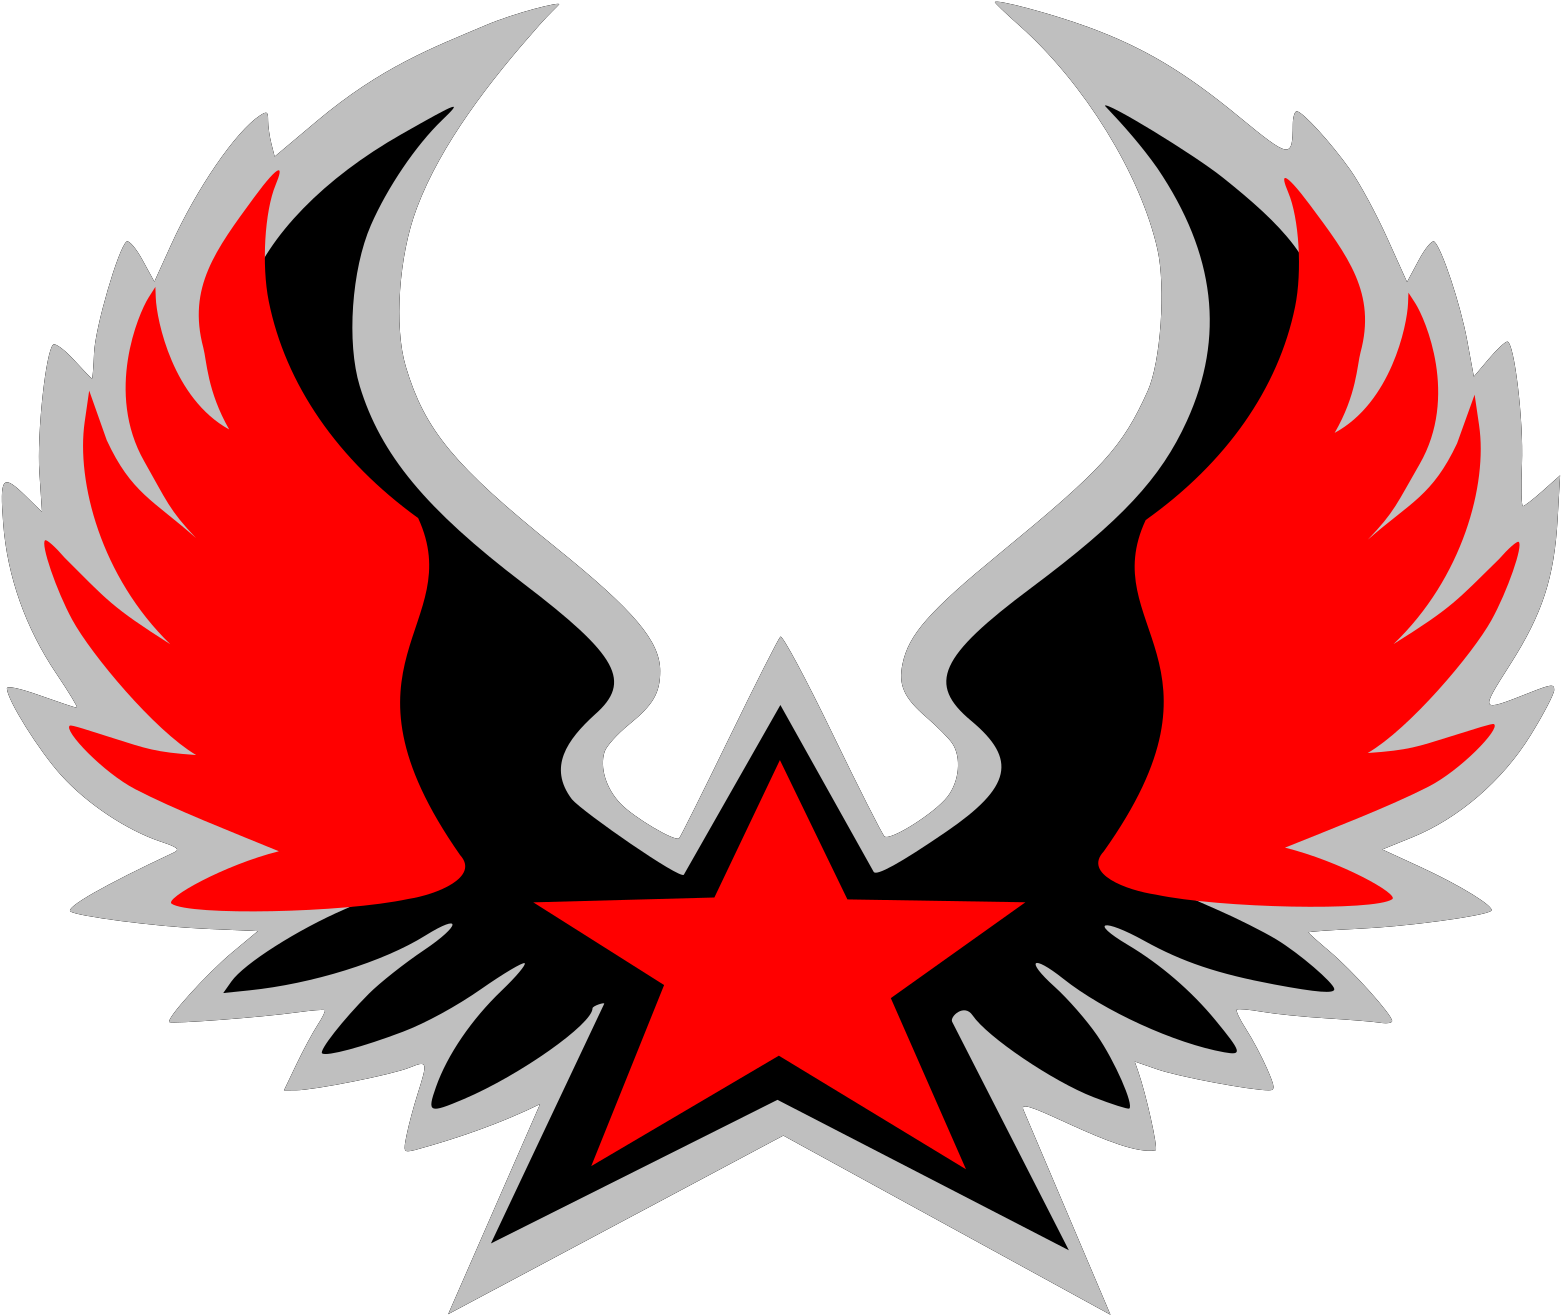 https://www.freeiconspng.com/uploads/red-and-black-wings-with-x-gaming-logo-png-21.png